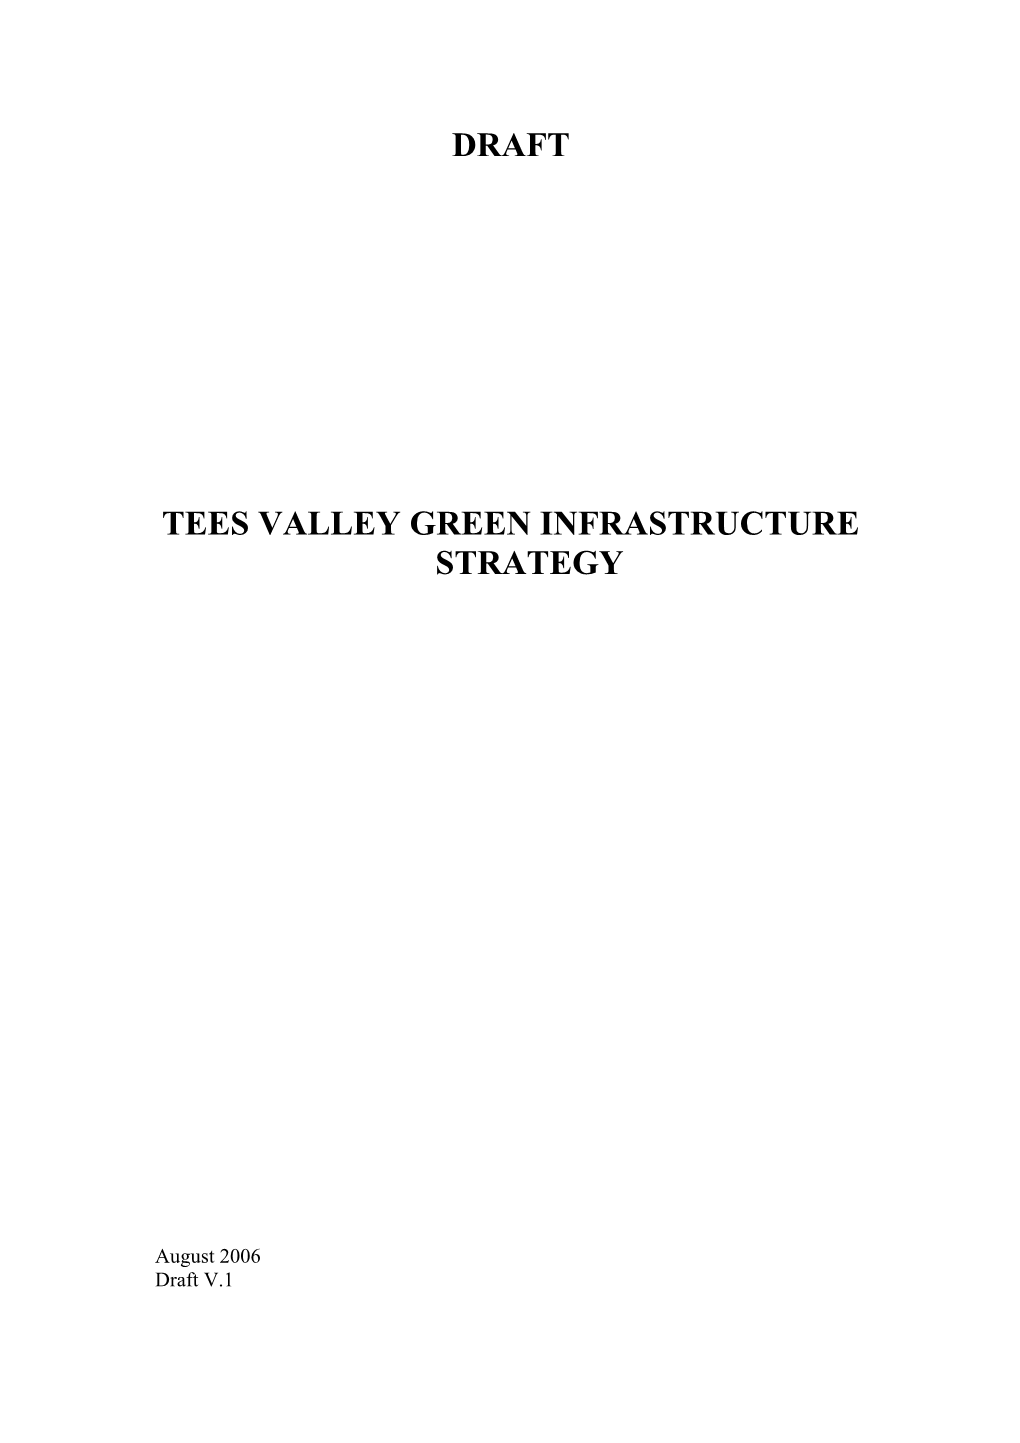 Tees Valley Green Infrastructure Strategy